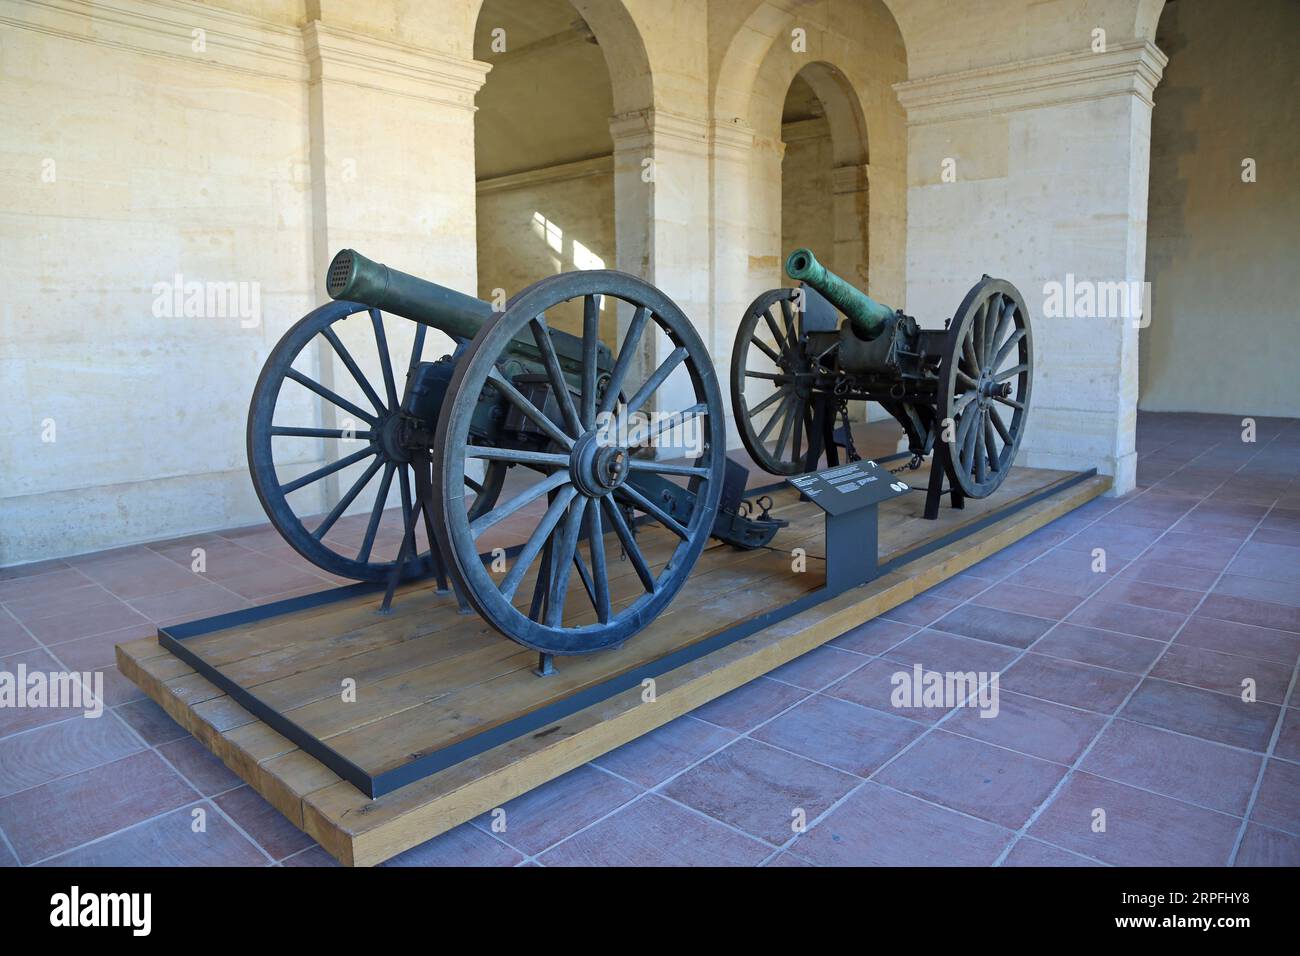 Two historic cannons - The Army Museum, Paris, France Stock Photo